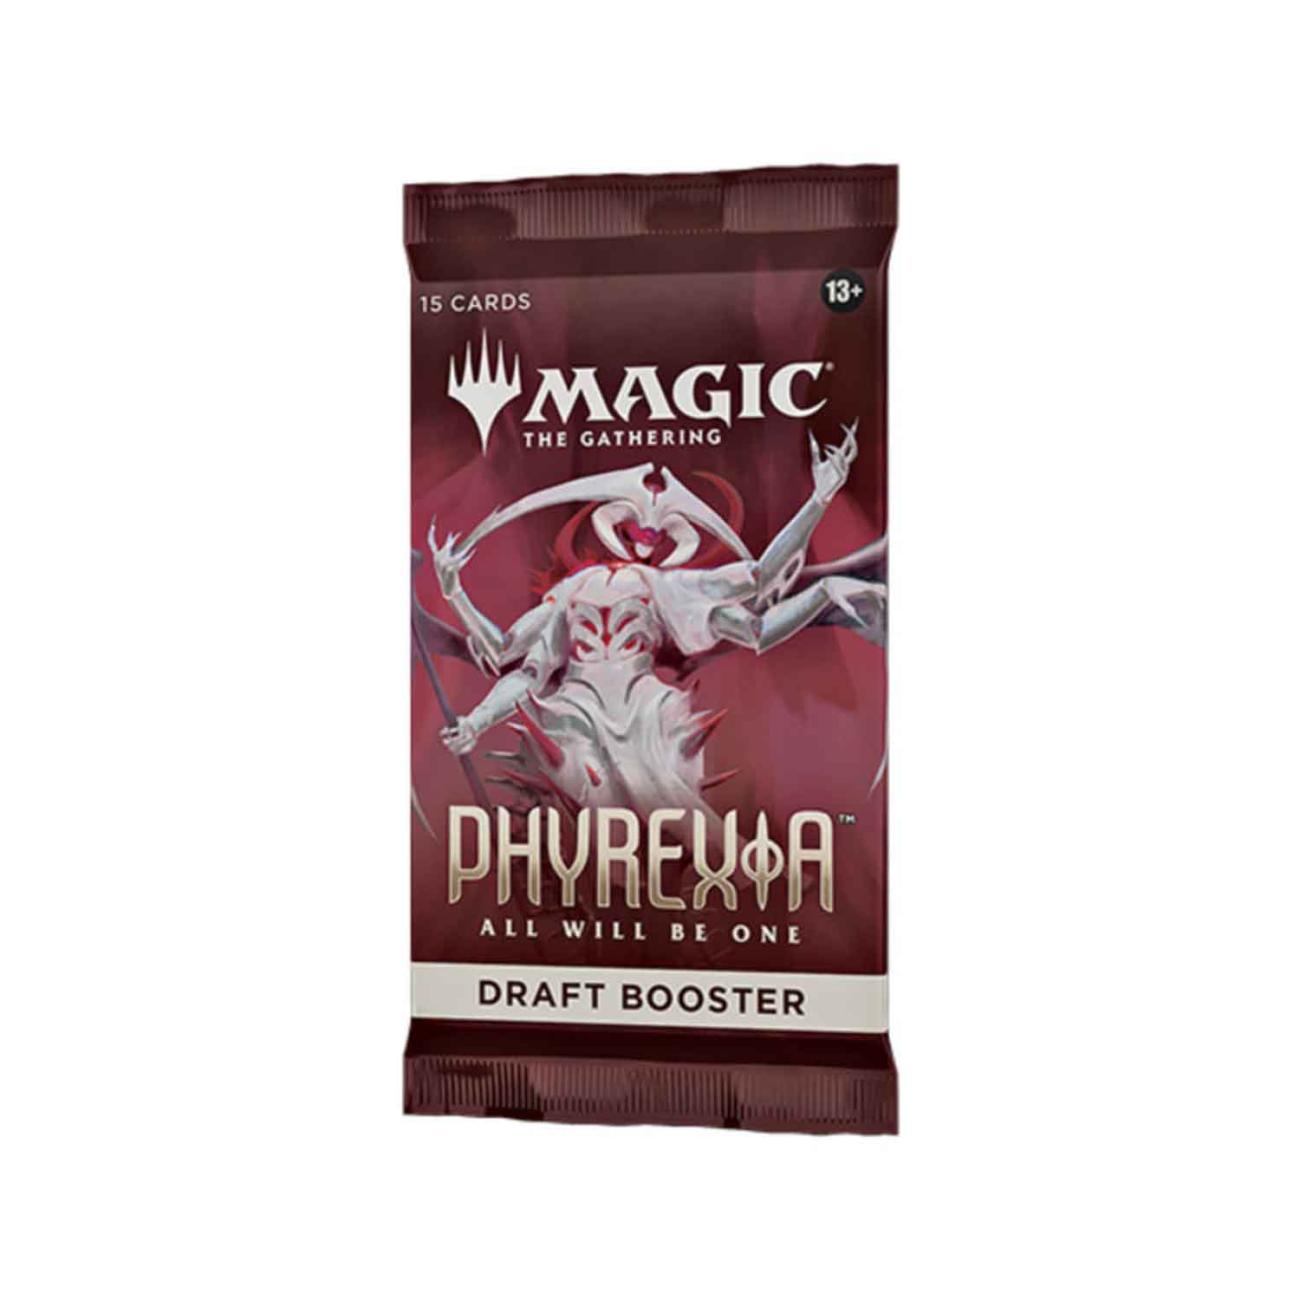 Phrexia All Will Be One Single Draft Booster Pack